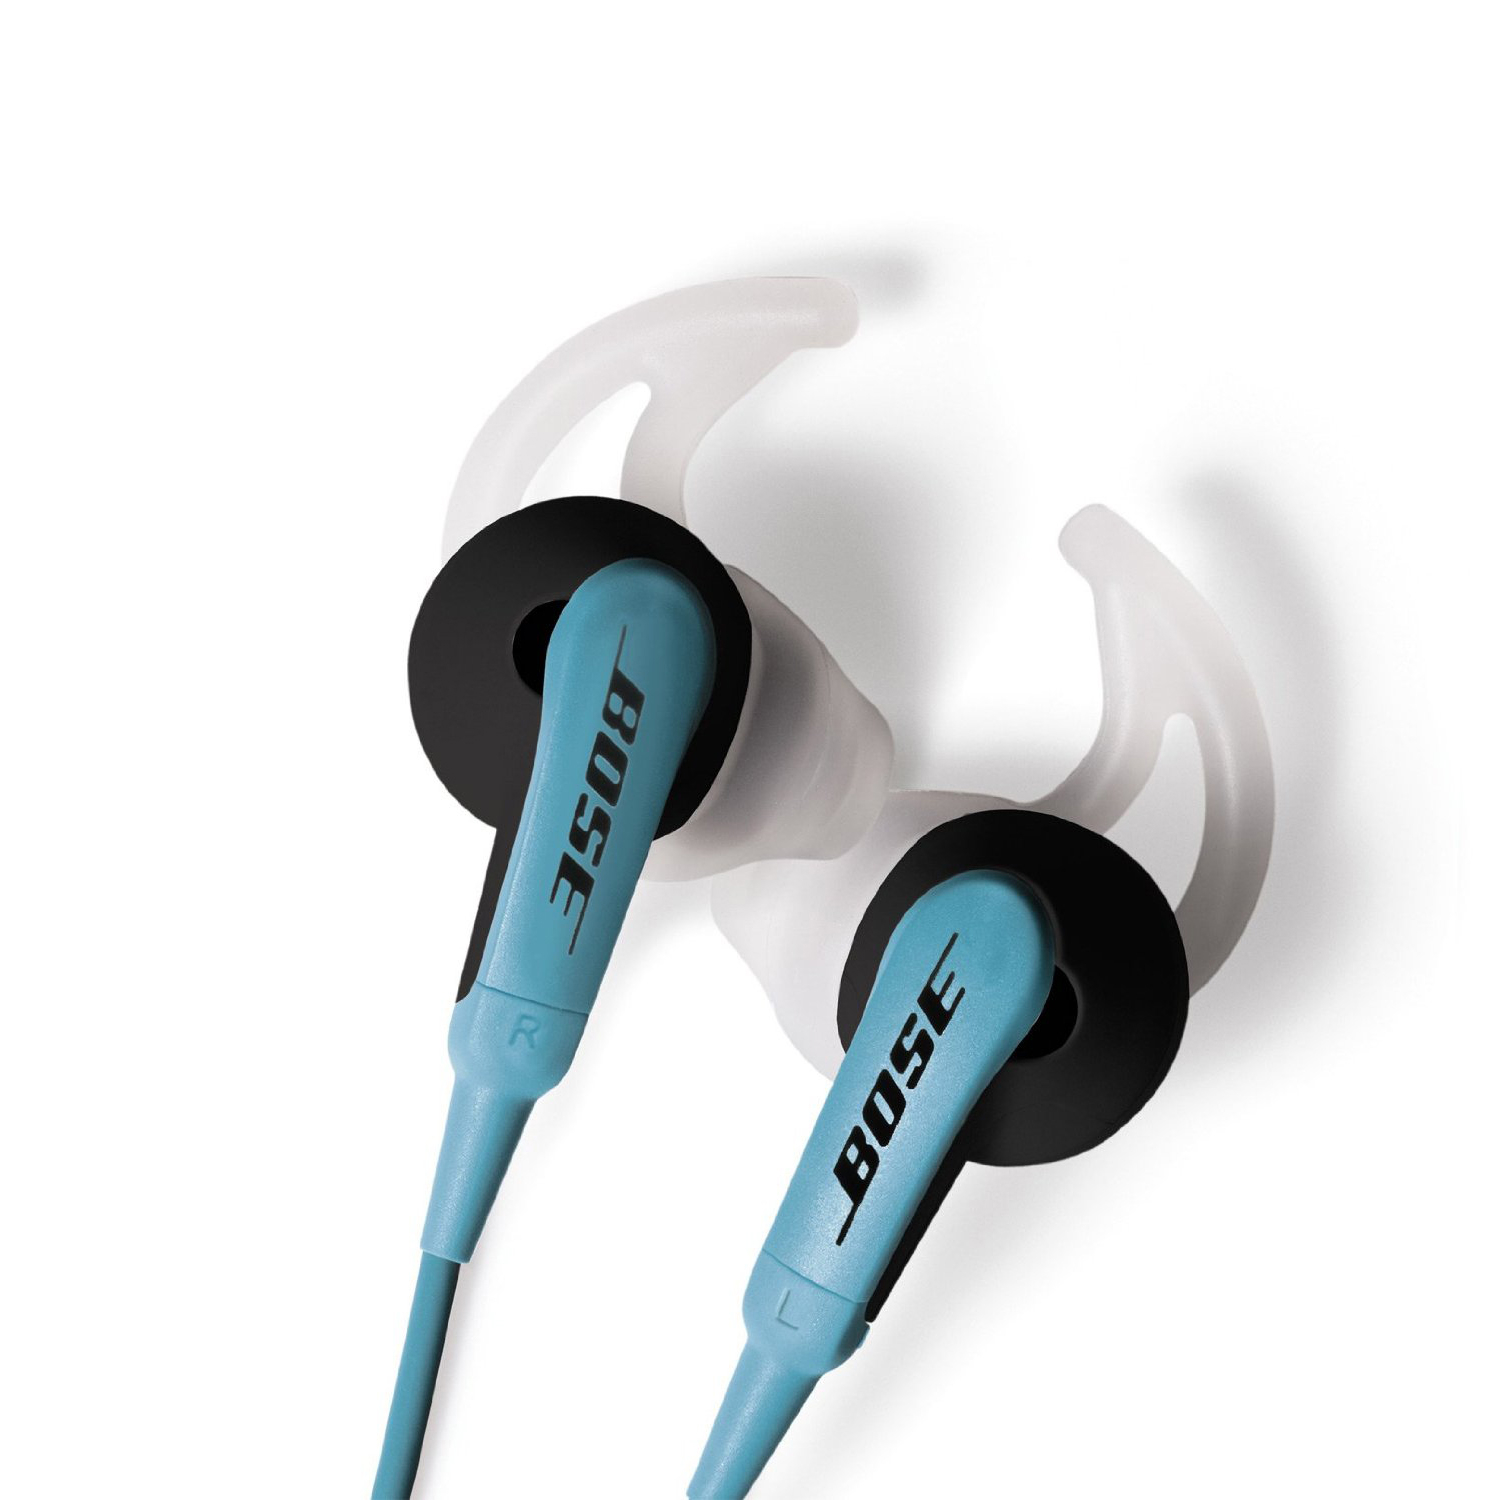 Best Bose Earphone/Ear buds for iPhone 5s, 5, 4s and 4 | Gadgets